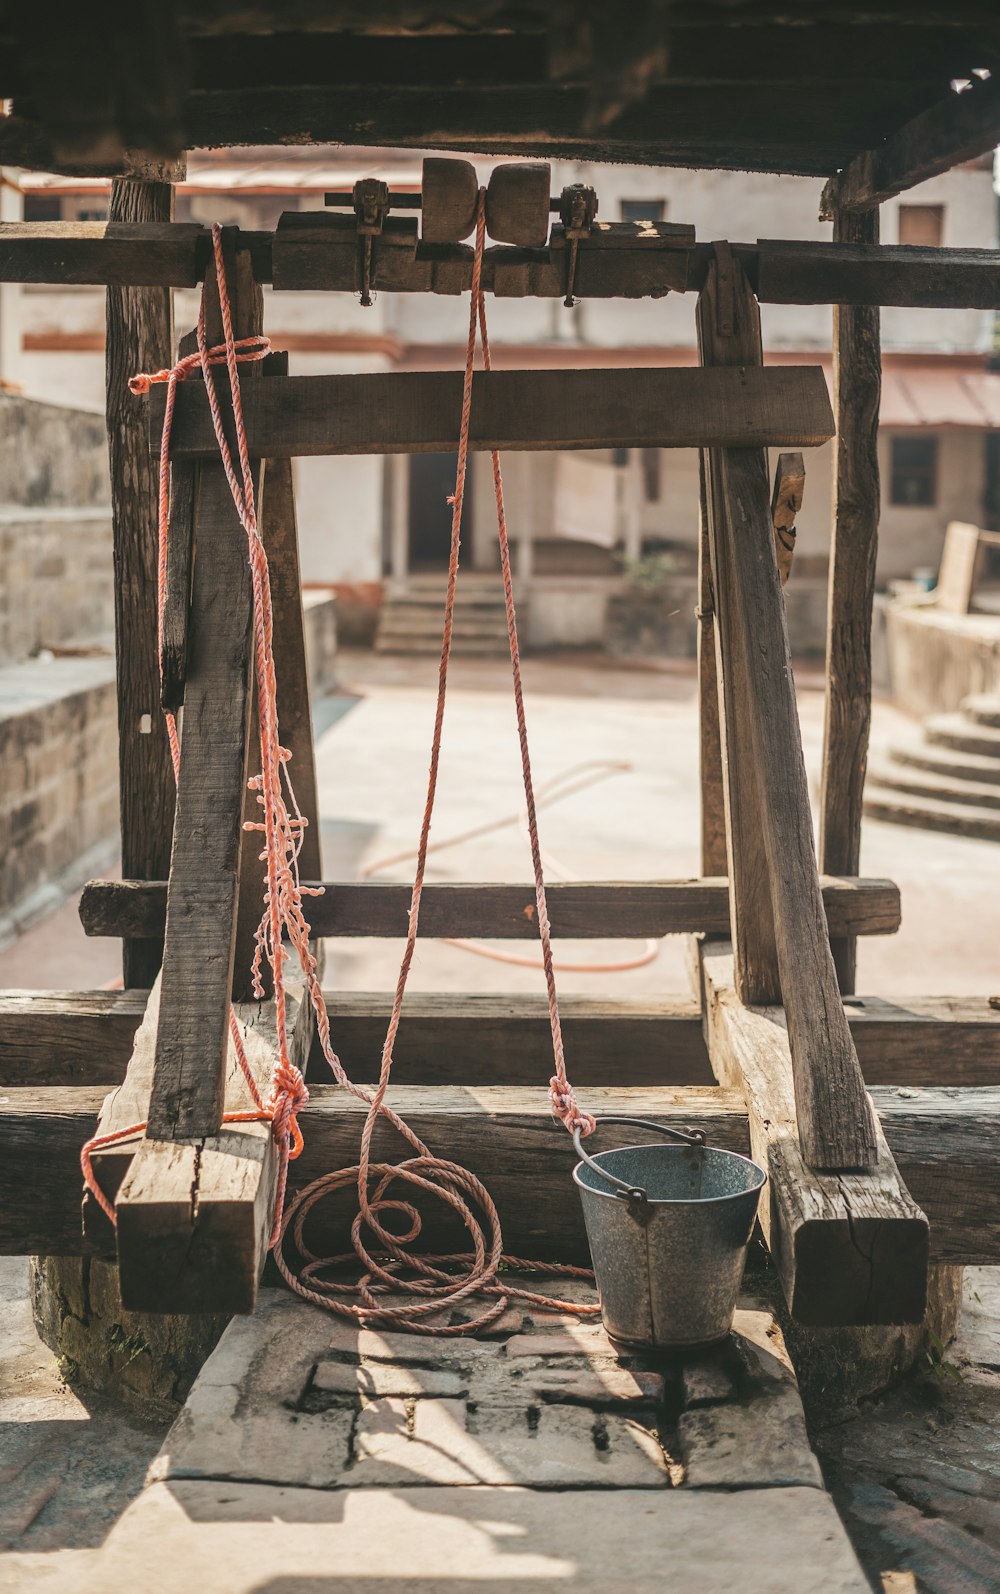 a wooden structure with ropes and buckets hanging from it